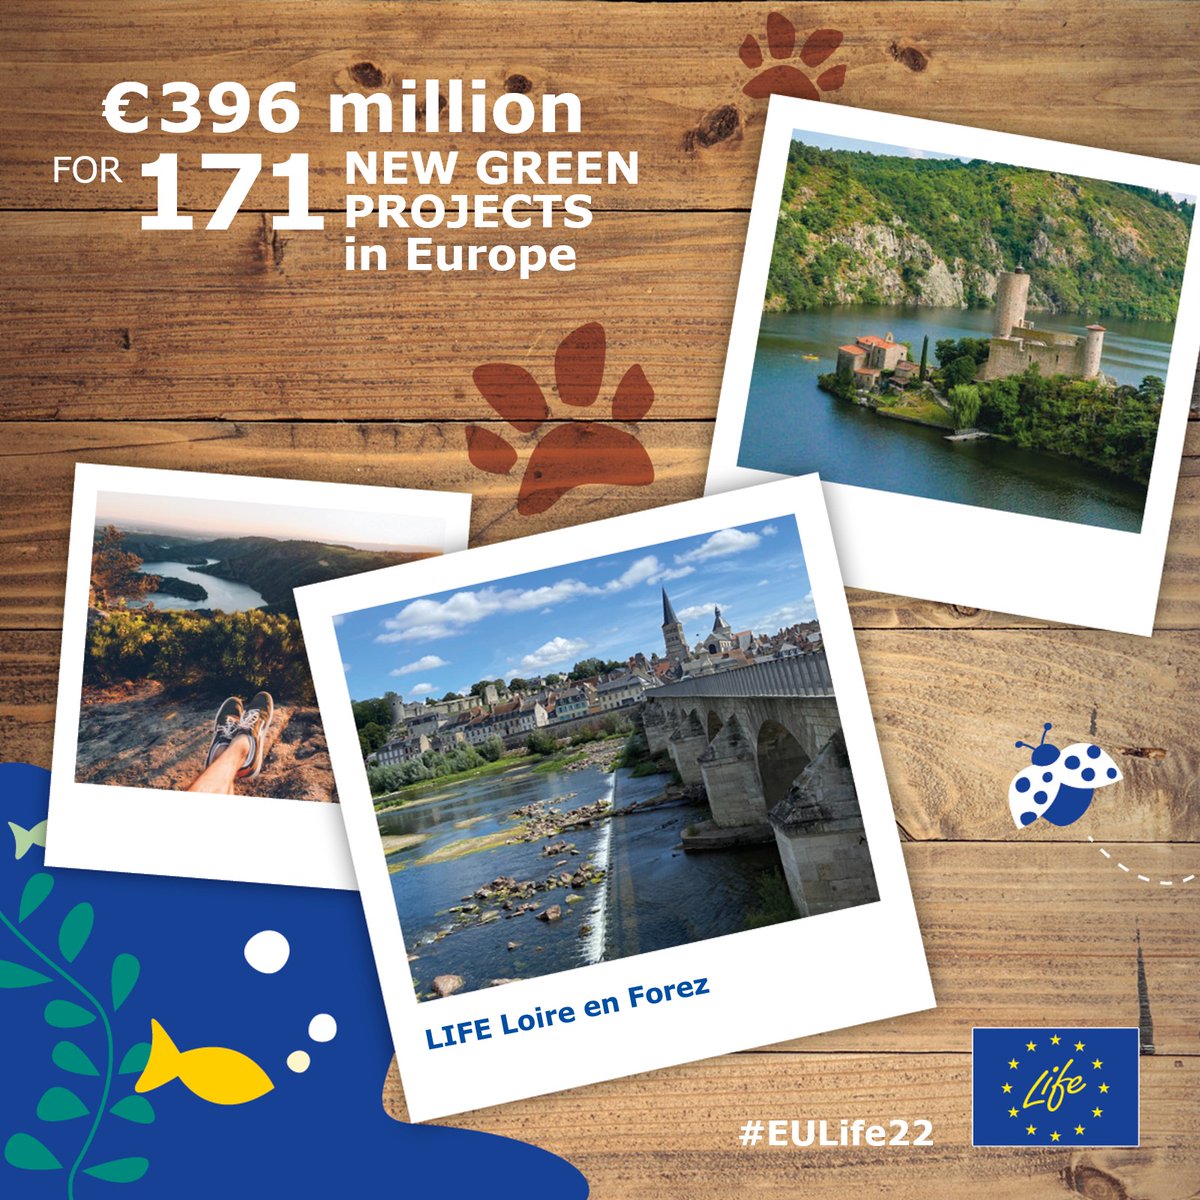 Restoring the Loire river with #EULife22 project LIFE Loire en Forez!🏞️ By protecting #Natura2000 sites in the region, this new #LIFEProject will make a difference for #EUBiodiversity in France 🇫🇷 👉europa.eu/!w4kXy4